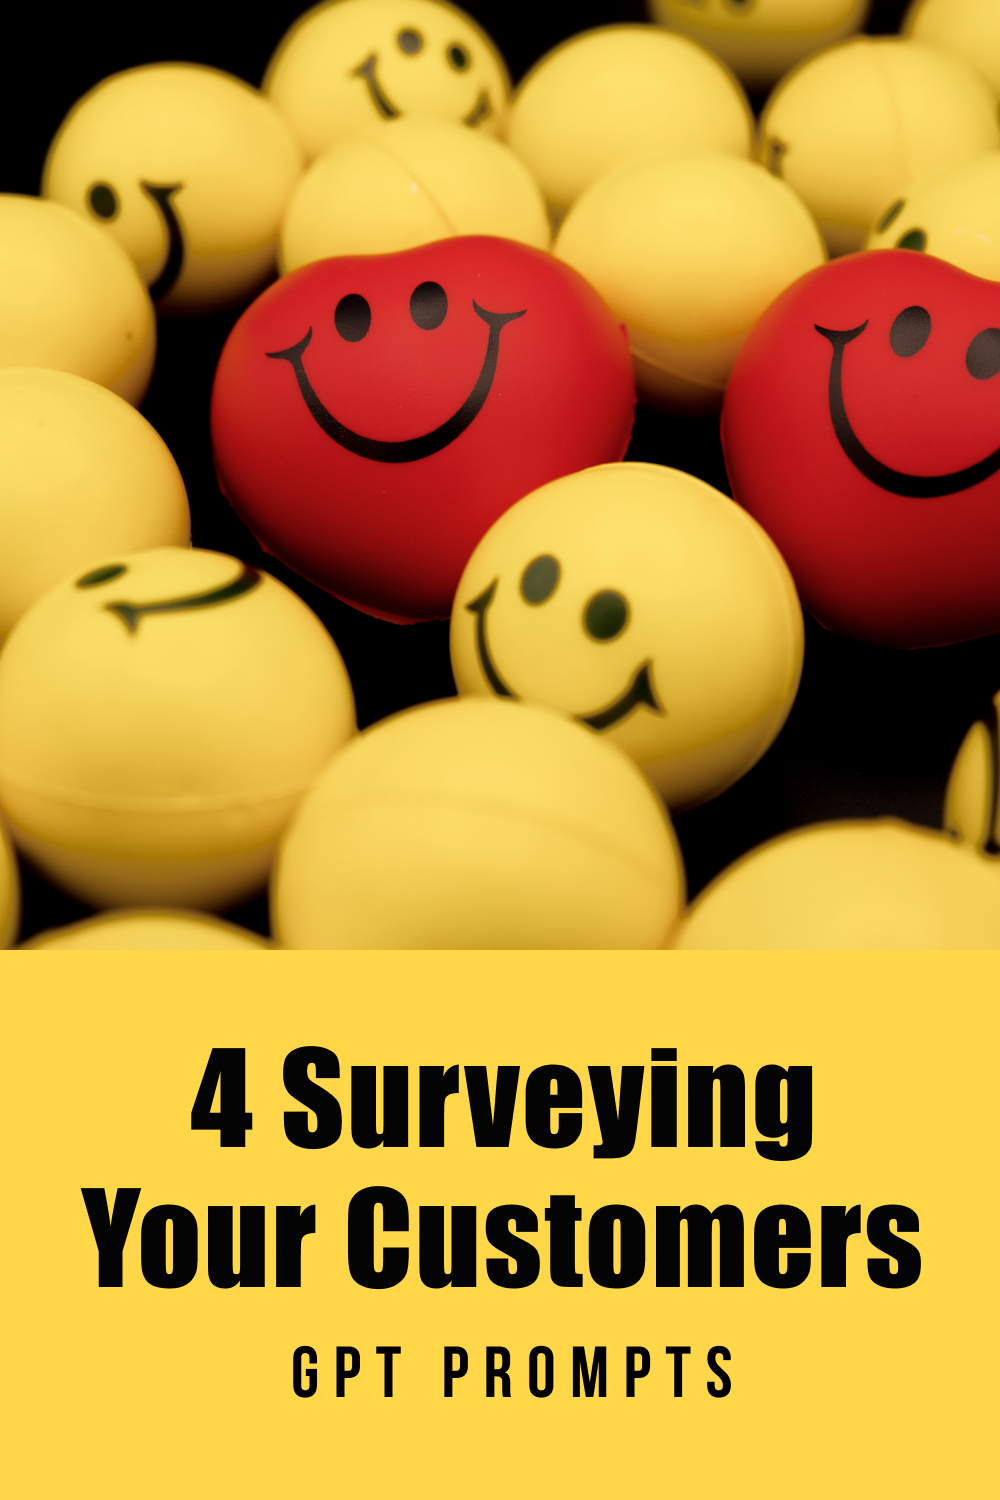 4 surveying your customers 1 257